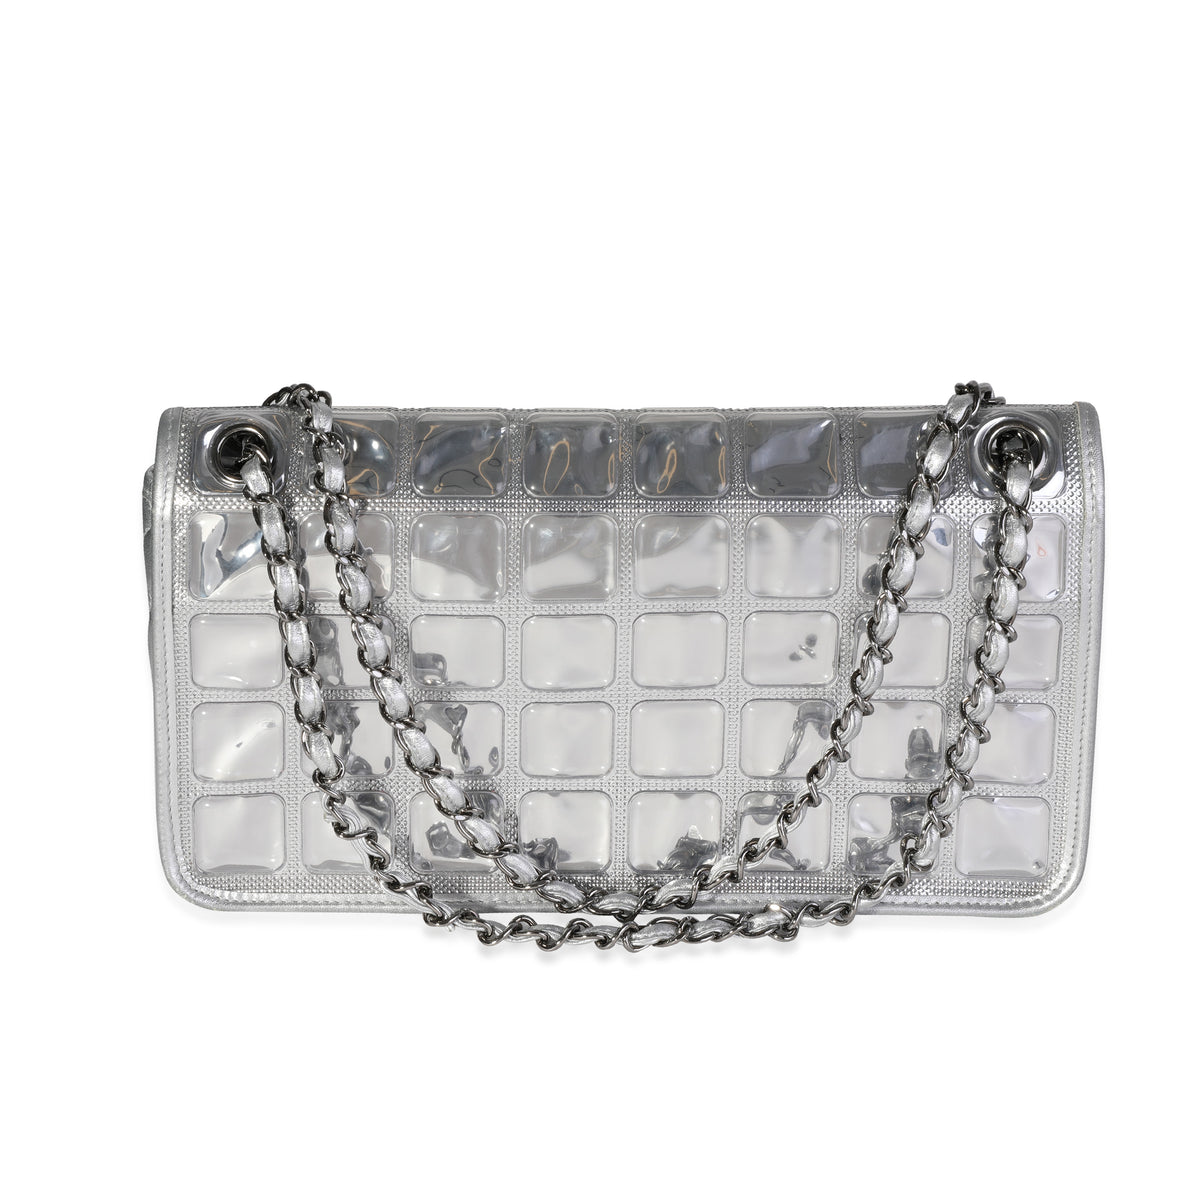 Chanel Gold Ice Cube Chain Flap Bag